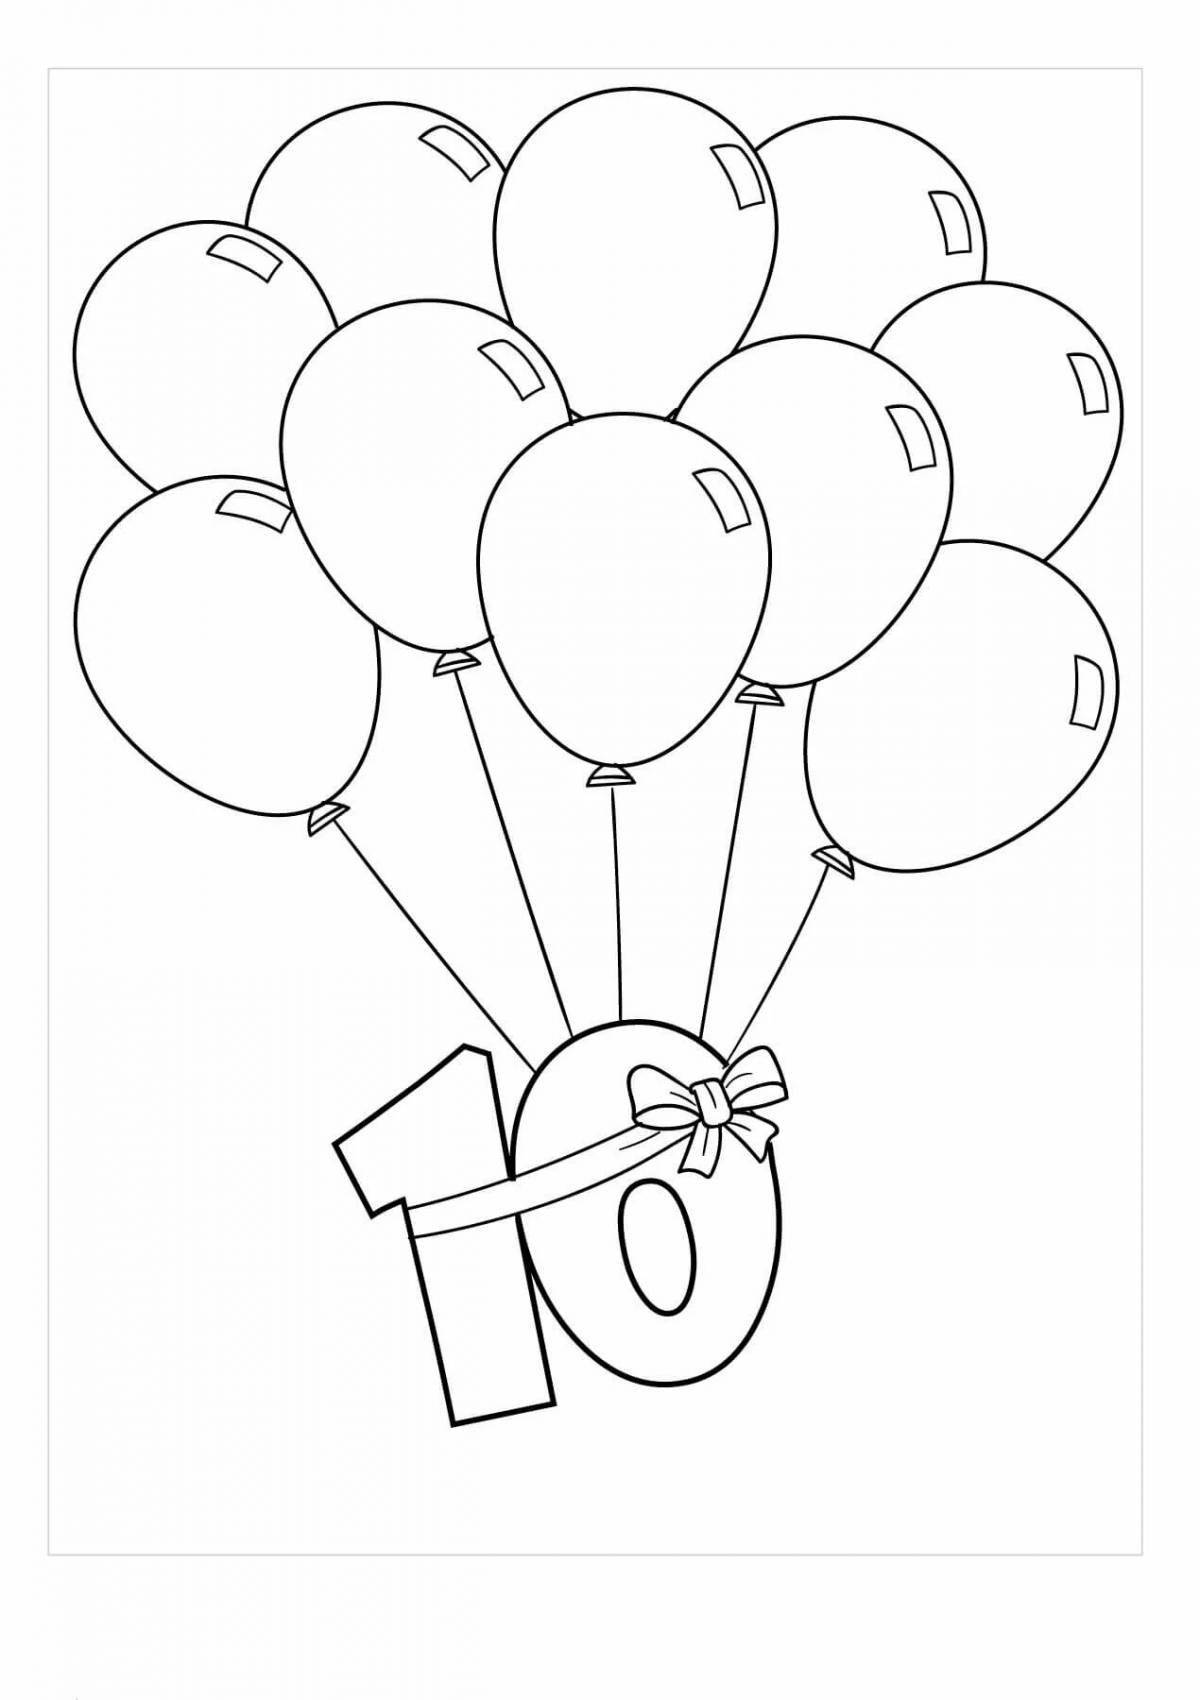 Glitter coloring page with balloons for kids